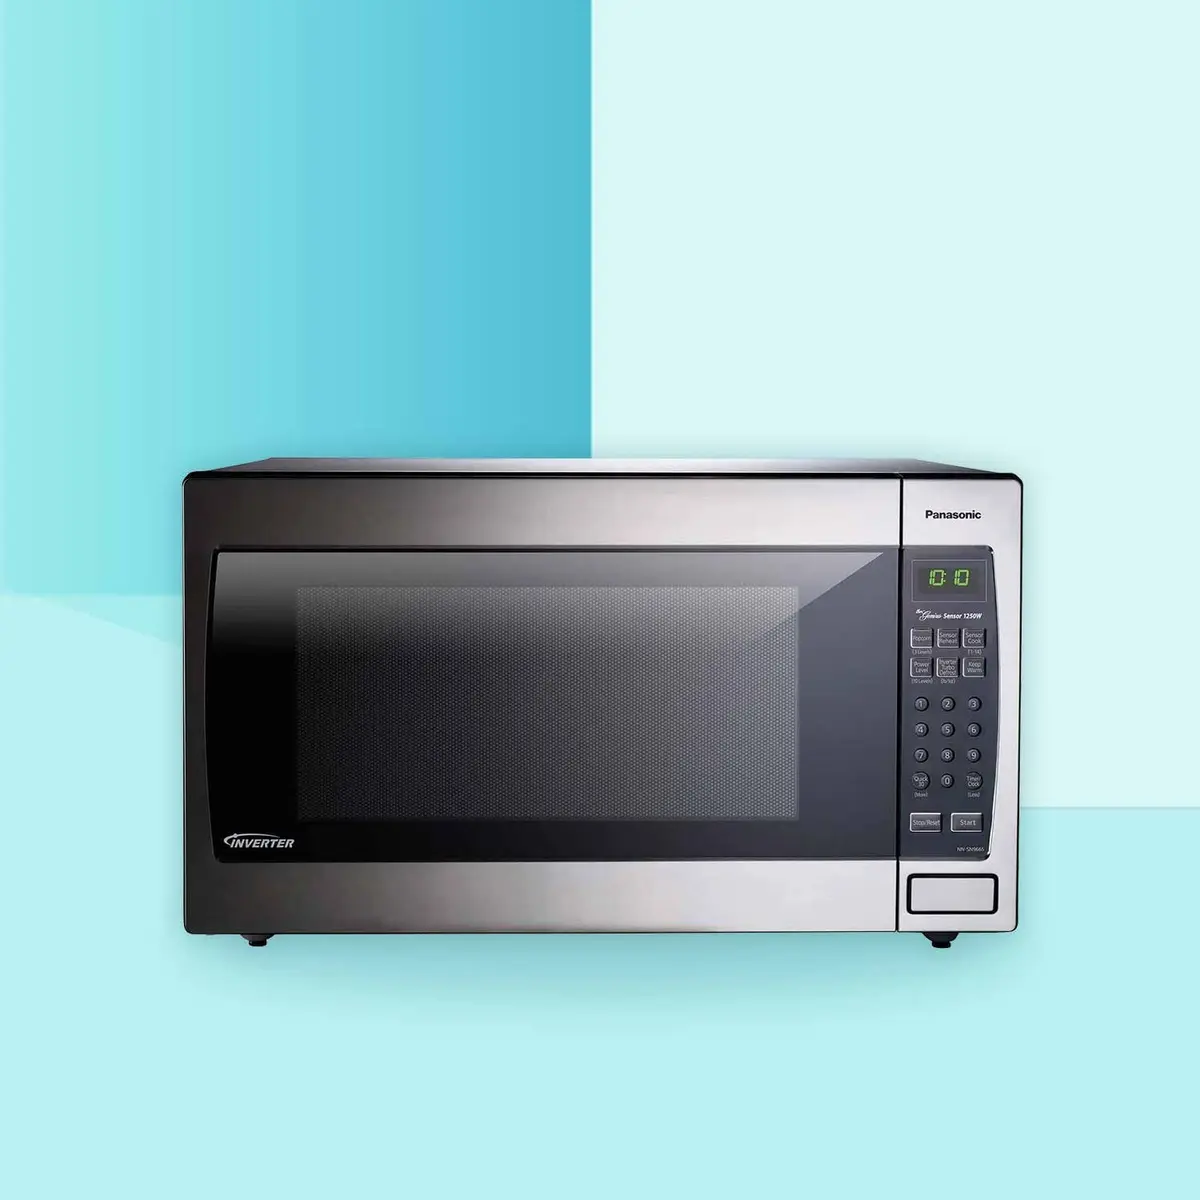 Best Built-in Microwave Ovens 2021